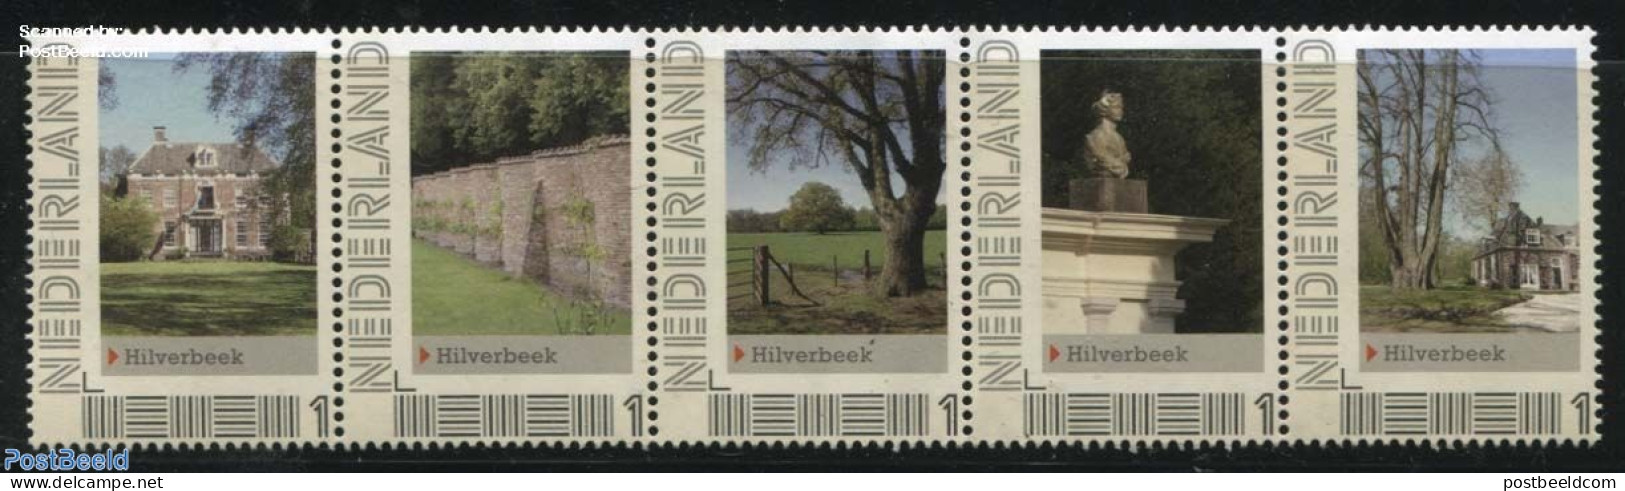 Netherlands - Personal Stamps TNT/PNL 2012 Hilverbeek 5V [::::], Mint NH, Nature - Trees & Forests - Castles & Fortifi.. - Rotary, Lions Club